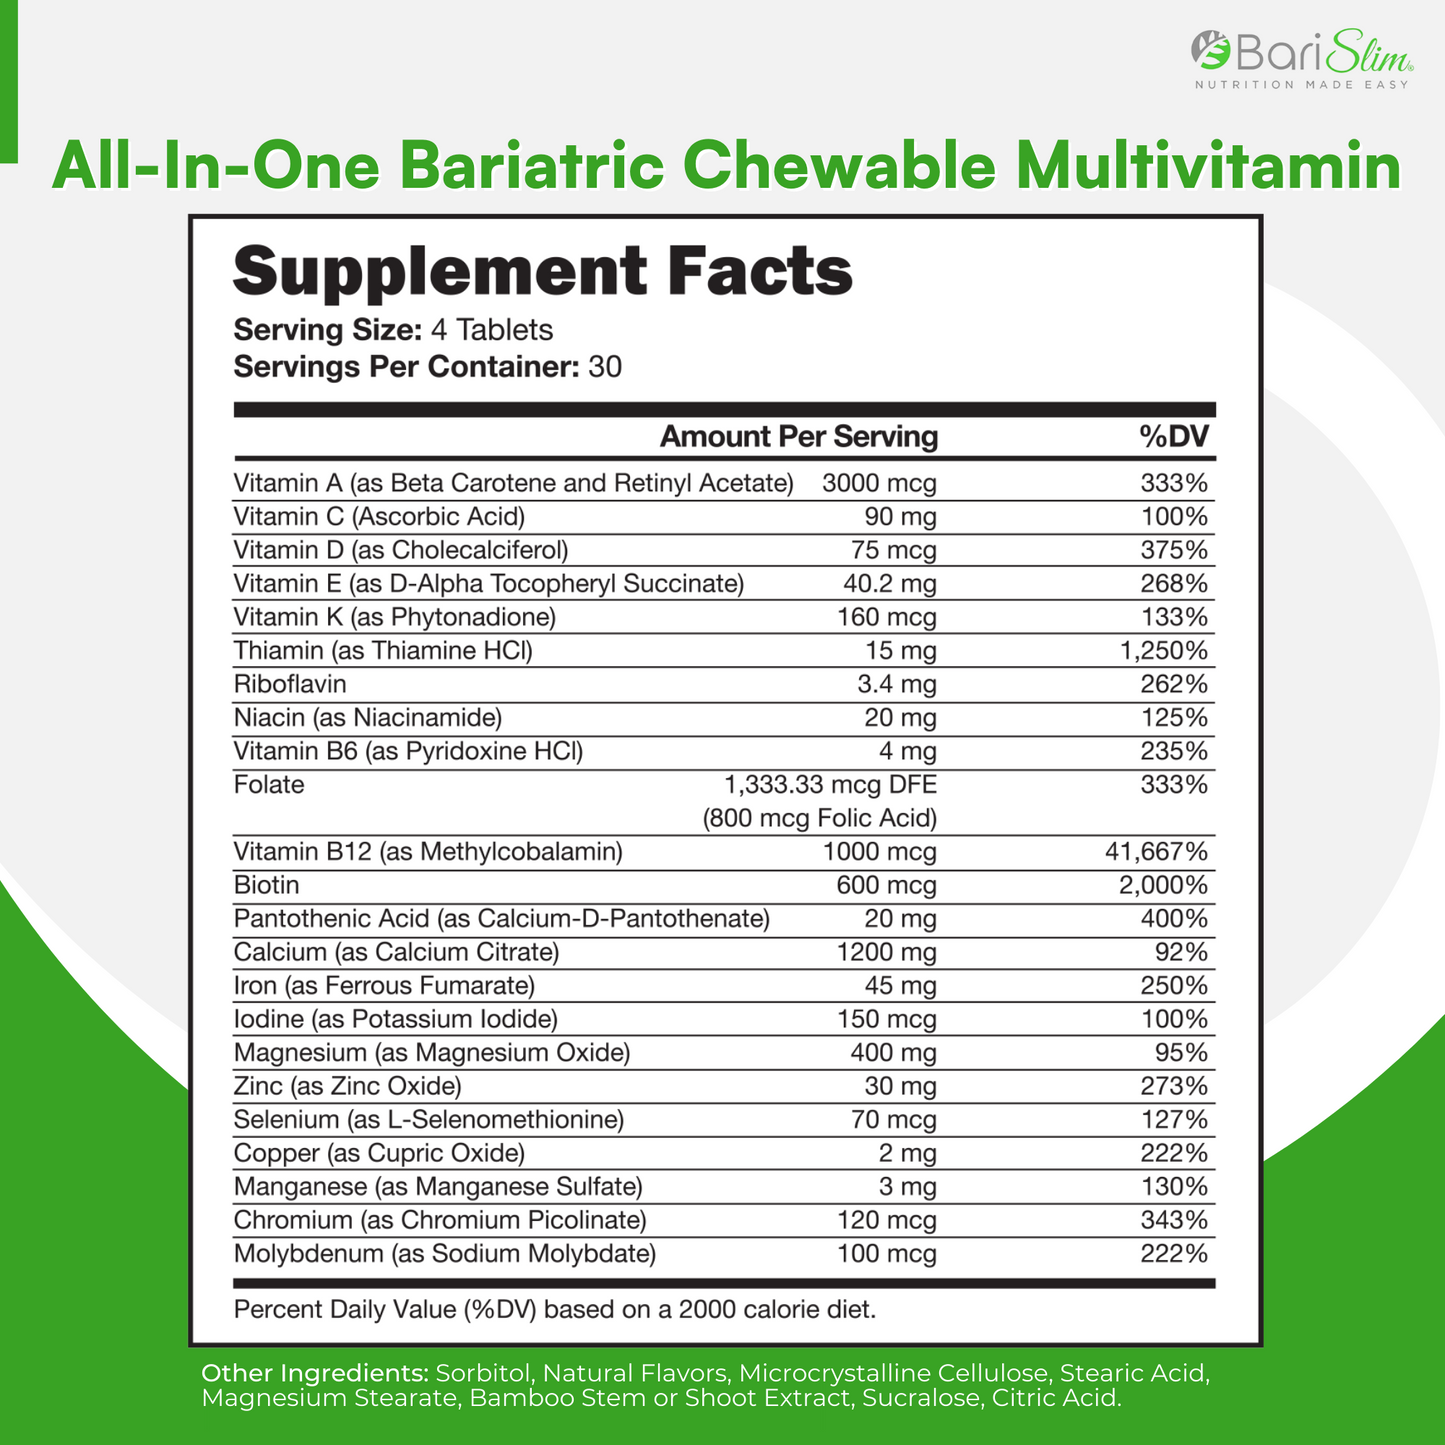 all-in-one bariatric multivitamin supplements